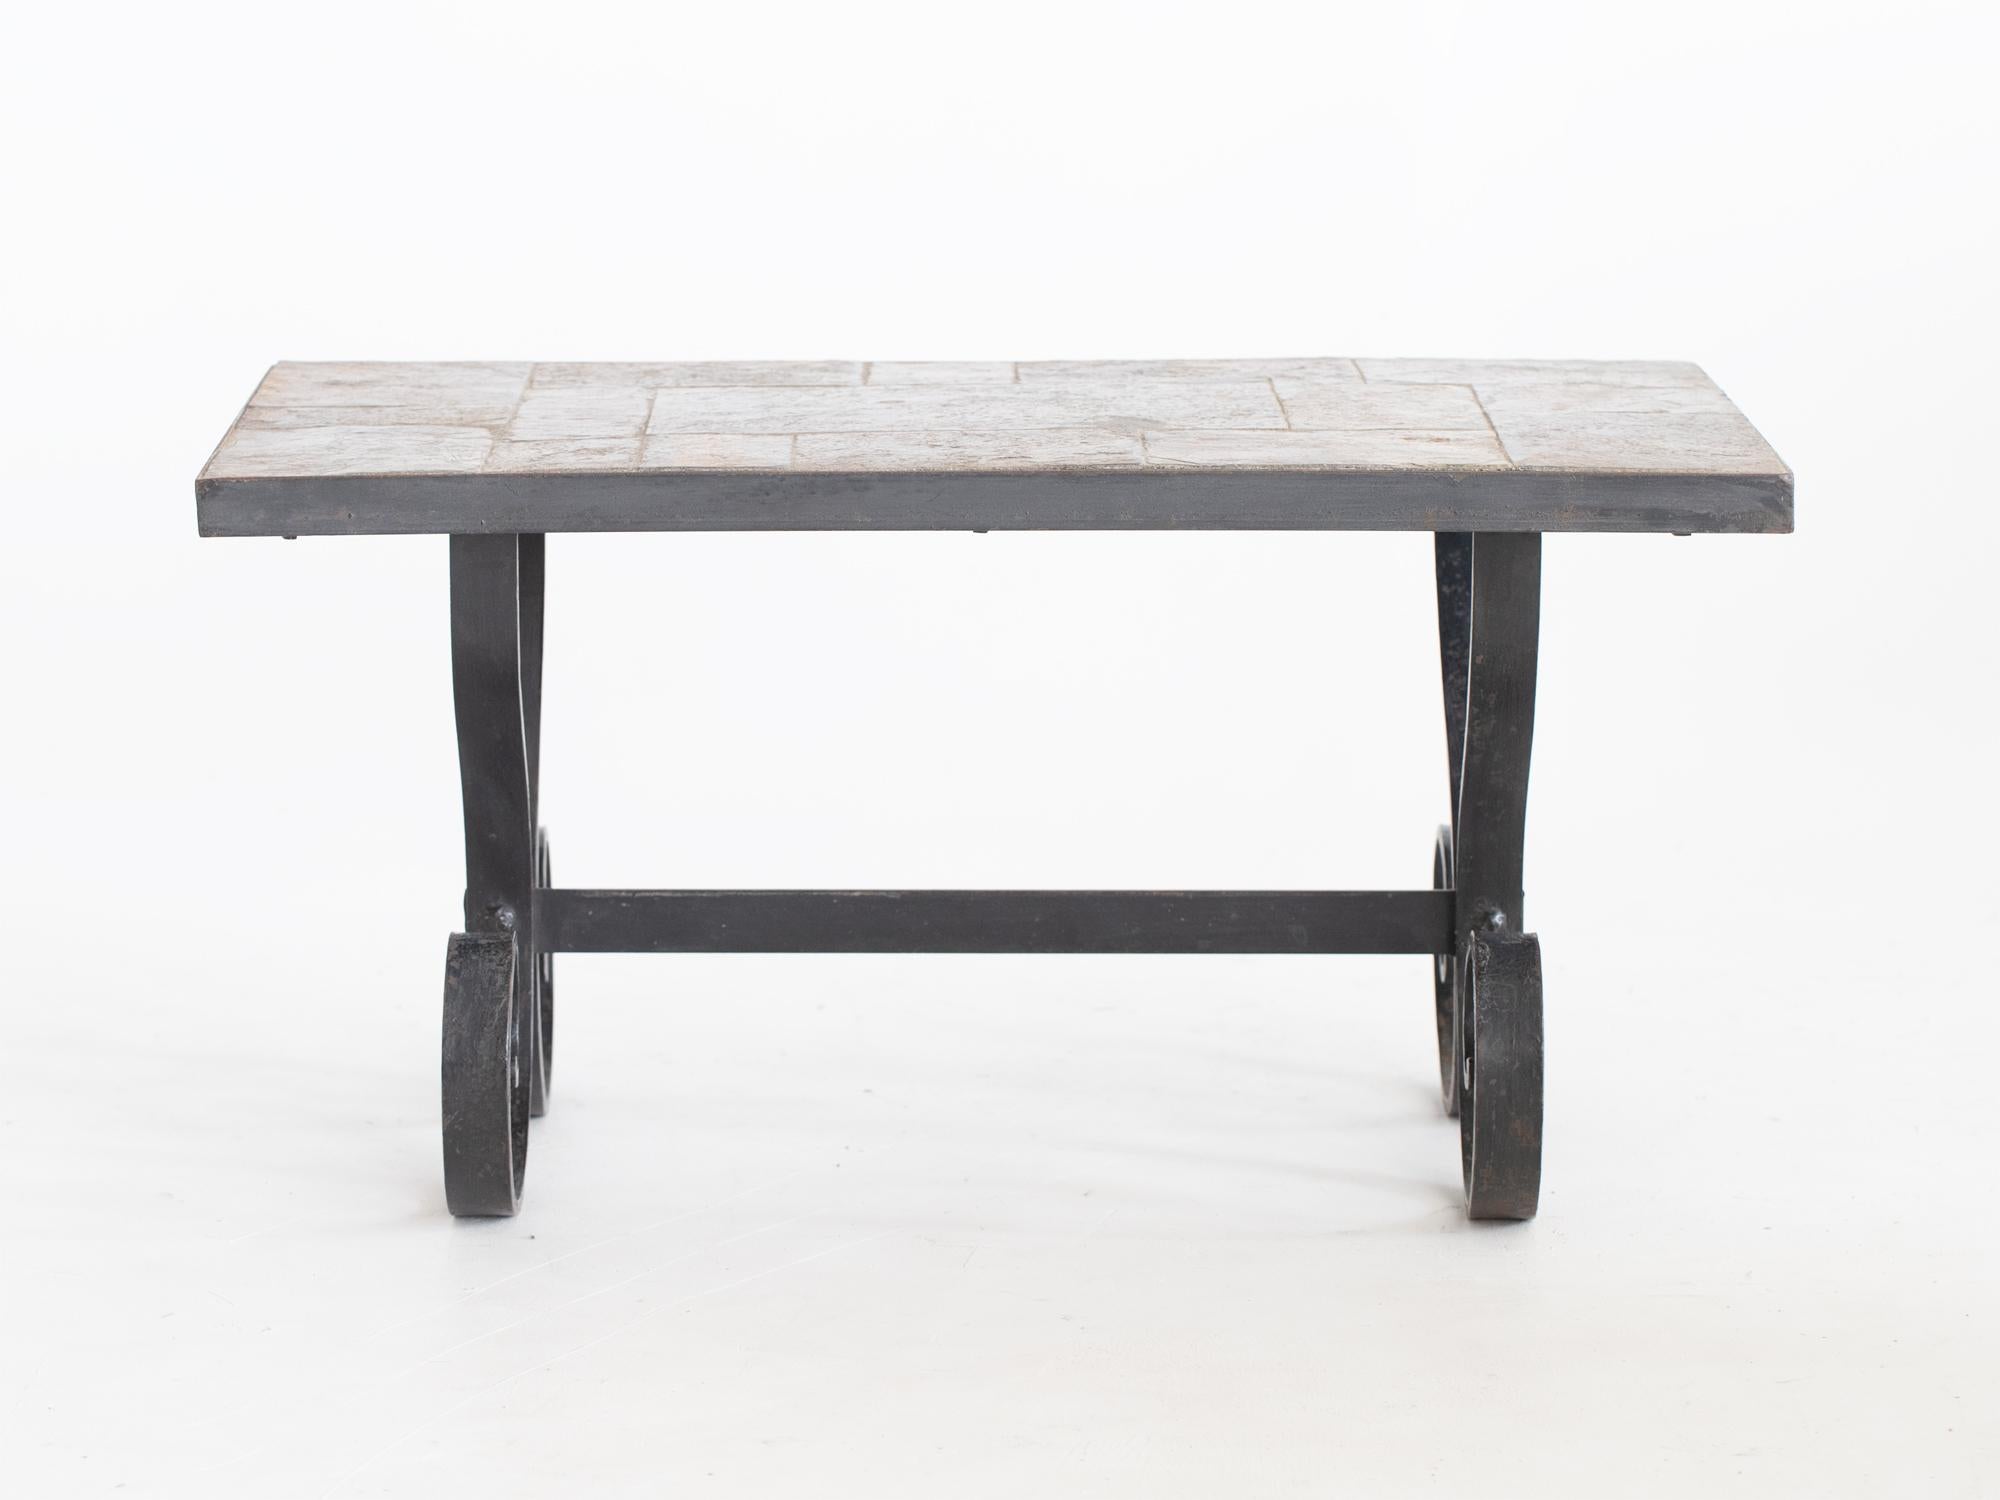 A mid century tiled slate and wrought iron coffee table in the manner of Jacques Adnet. French, mid 20C.

Stock ref. #2202

In good sturdy order. Undamaged slate with worn paint to the base.

40.5 x 80 x 45 cm

15.9 x 31.5 x 17.7 